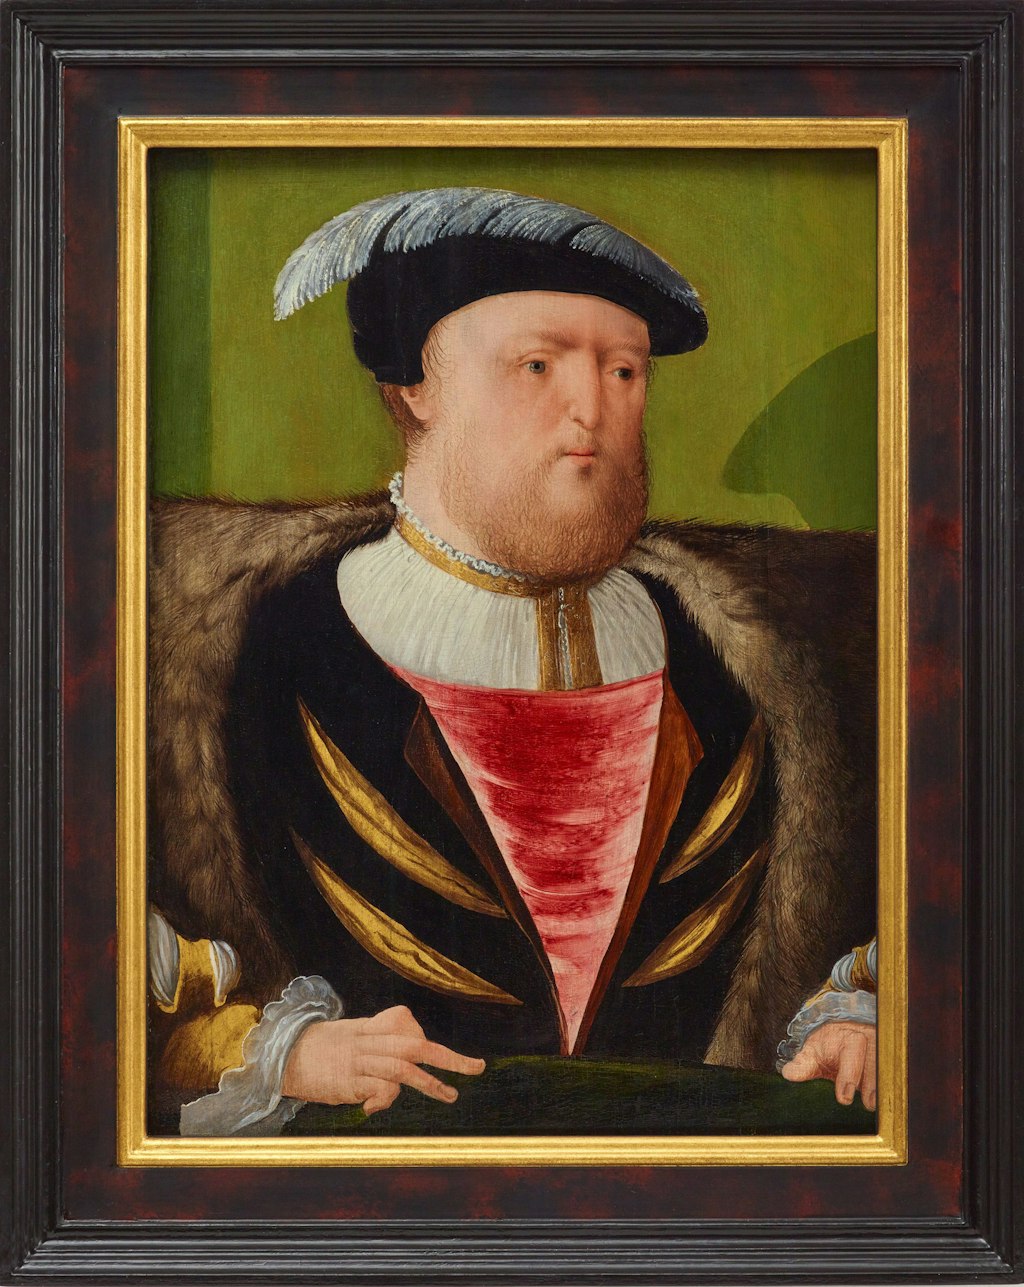 A painting of a bearded man framed in a dark timber frame with gilded inner frame.